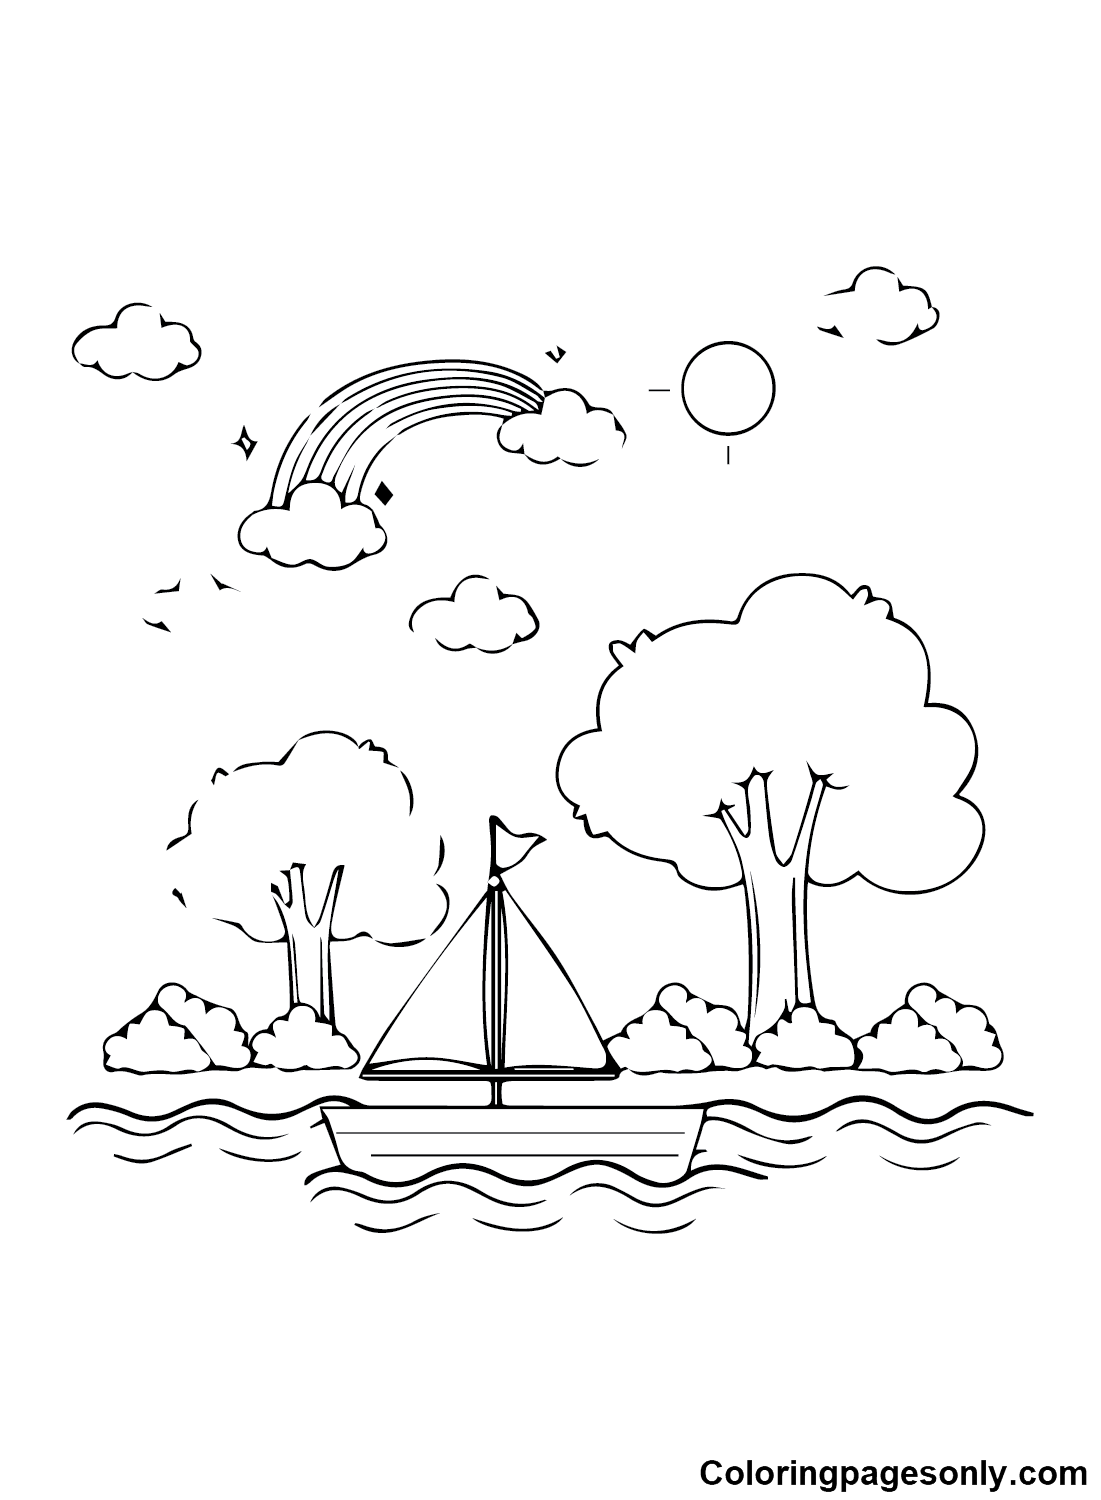 Ship to Print Coloring Pages